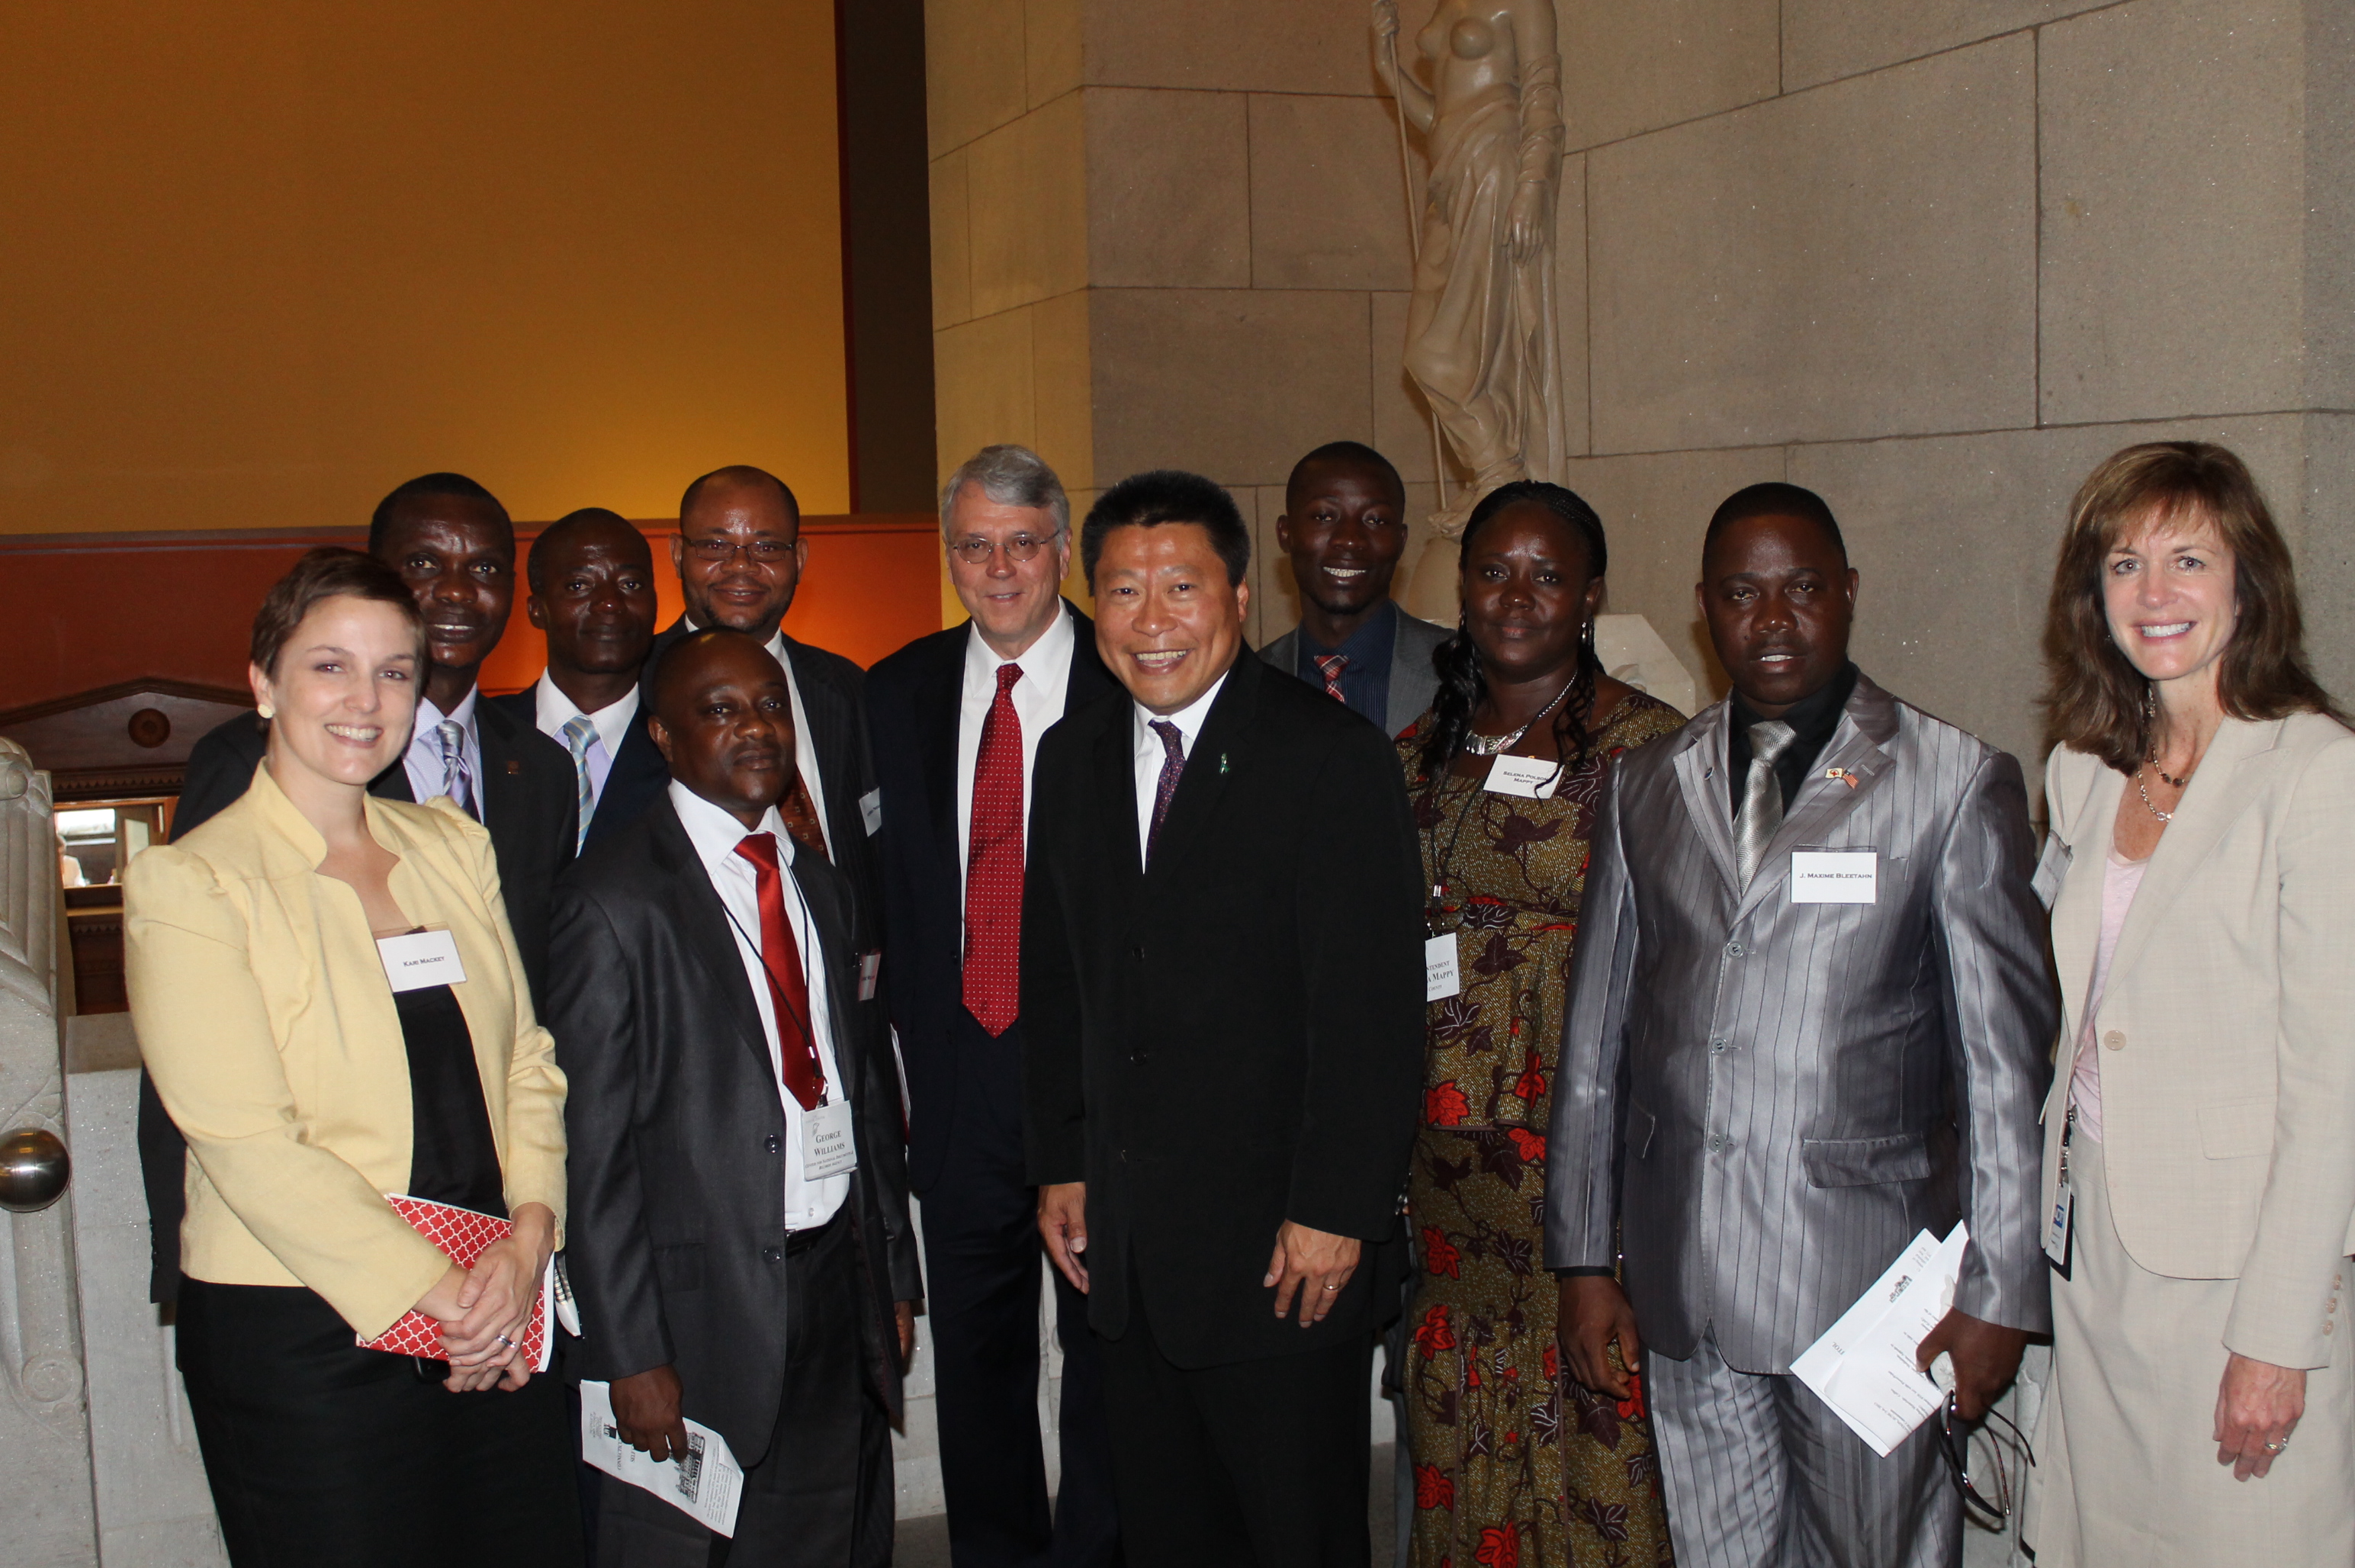 State Representatives Ed Jutila and Tony Hwang (center) met with a group of Liberian governmental officials during their visit to study Connecticut’s open government laws on June 3 -4 2013.